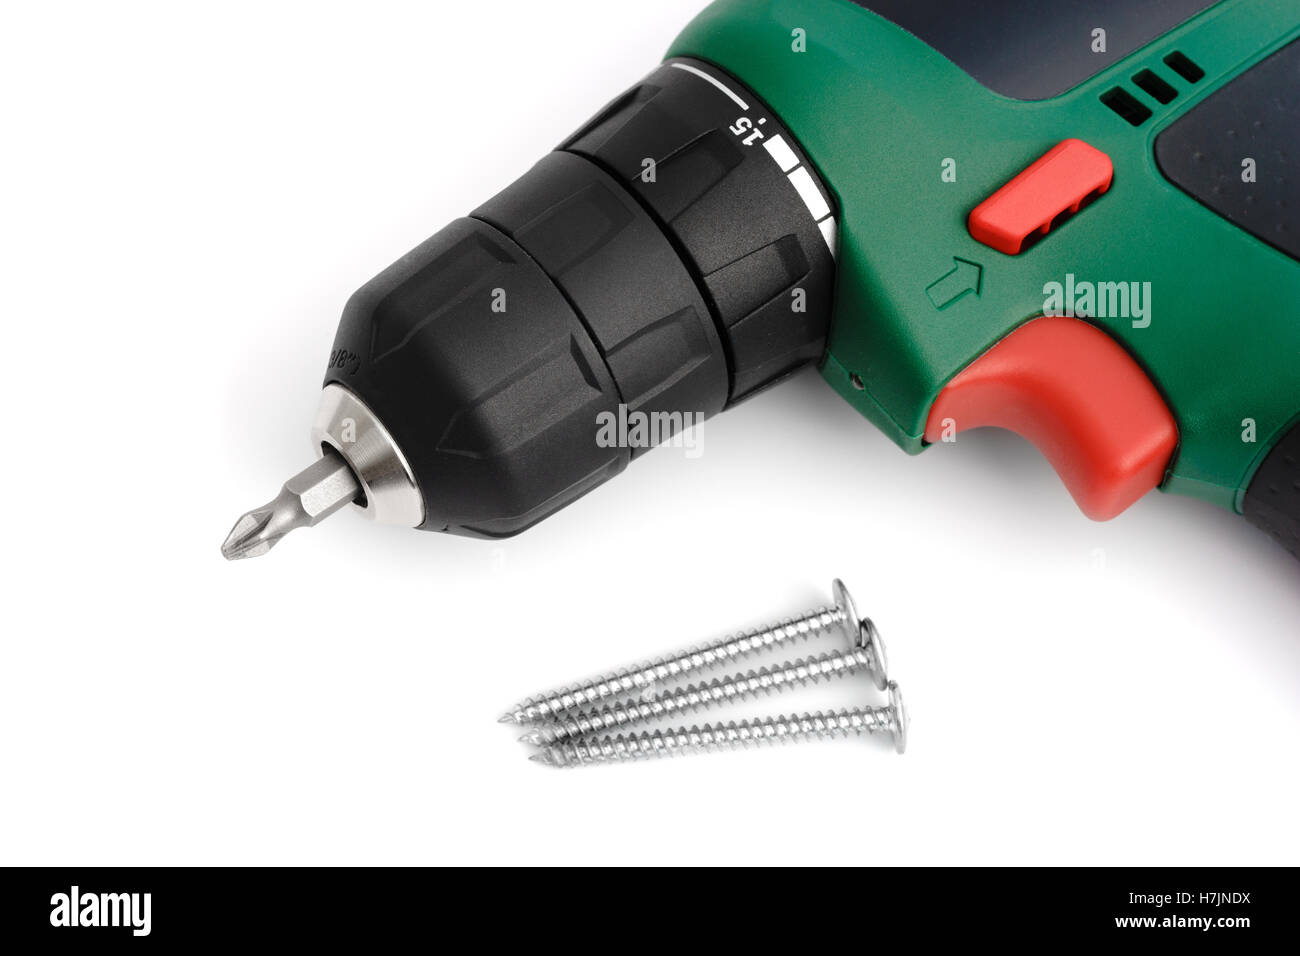 https://c8.alamy.com/comp/H7JNDX/hand-electric-drill-on-a-white-background-isolated-H7JNDX.jpg